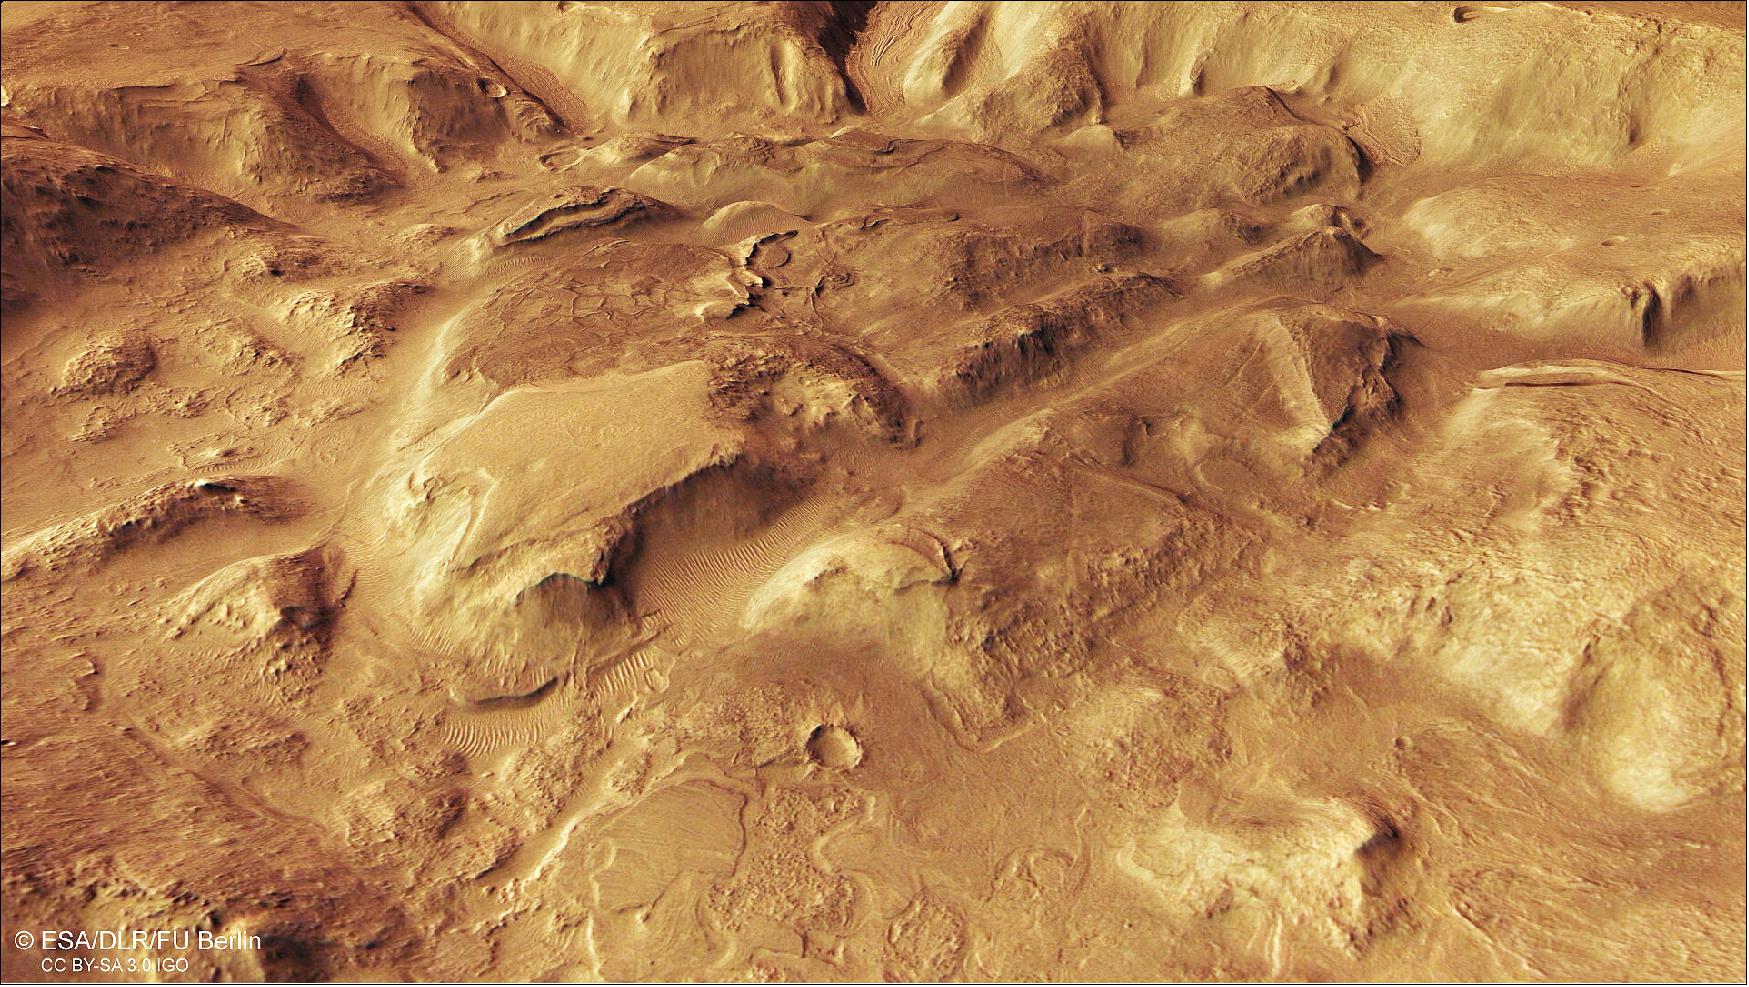 Figure 101: This image shows a region of Mars’ surface named Nilosyrtis Mensae. It comprises data gathered on 29 September 2019 during orbit 19908. The ground resolution is approximately 15 m/pixel and the images are centered at about 69ºE/31ºN. This image was created using data from the nadir and color channels of the HRSC. The nadir channel is aligned perpendicular to the surface of Mars, as if looking straight down at the surface. This perspective looks over the region from north to south (image credit: ESA/DLR/FU Berlin, CC BY-SA 3.0 IGO)